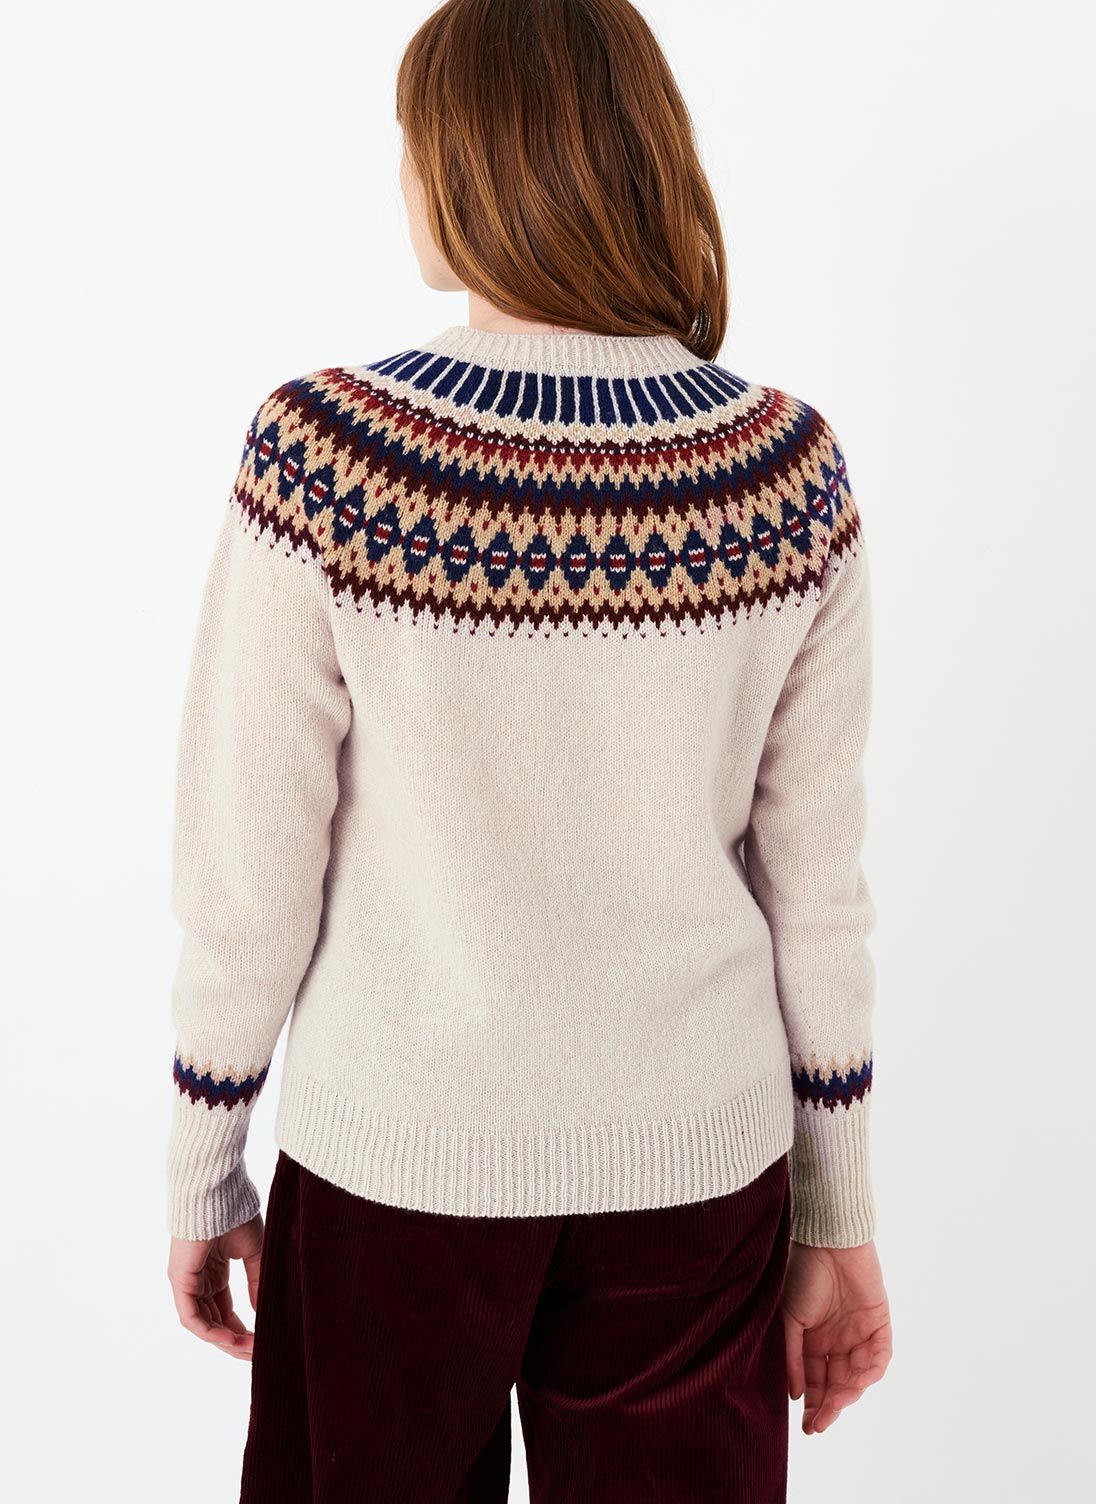 Kate Middleton's Fair Isle sweater by Brora x Troy London